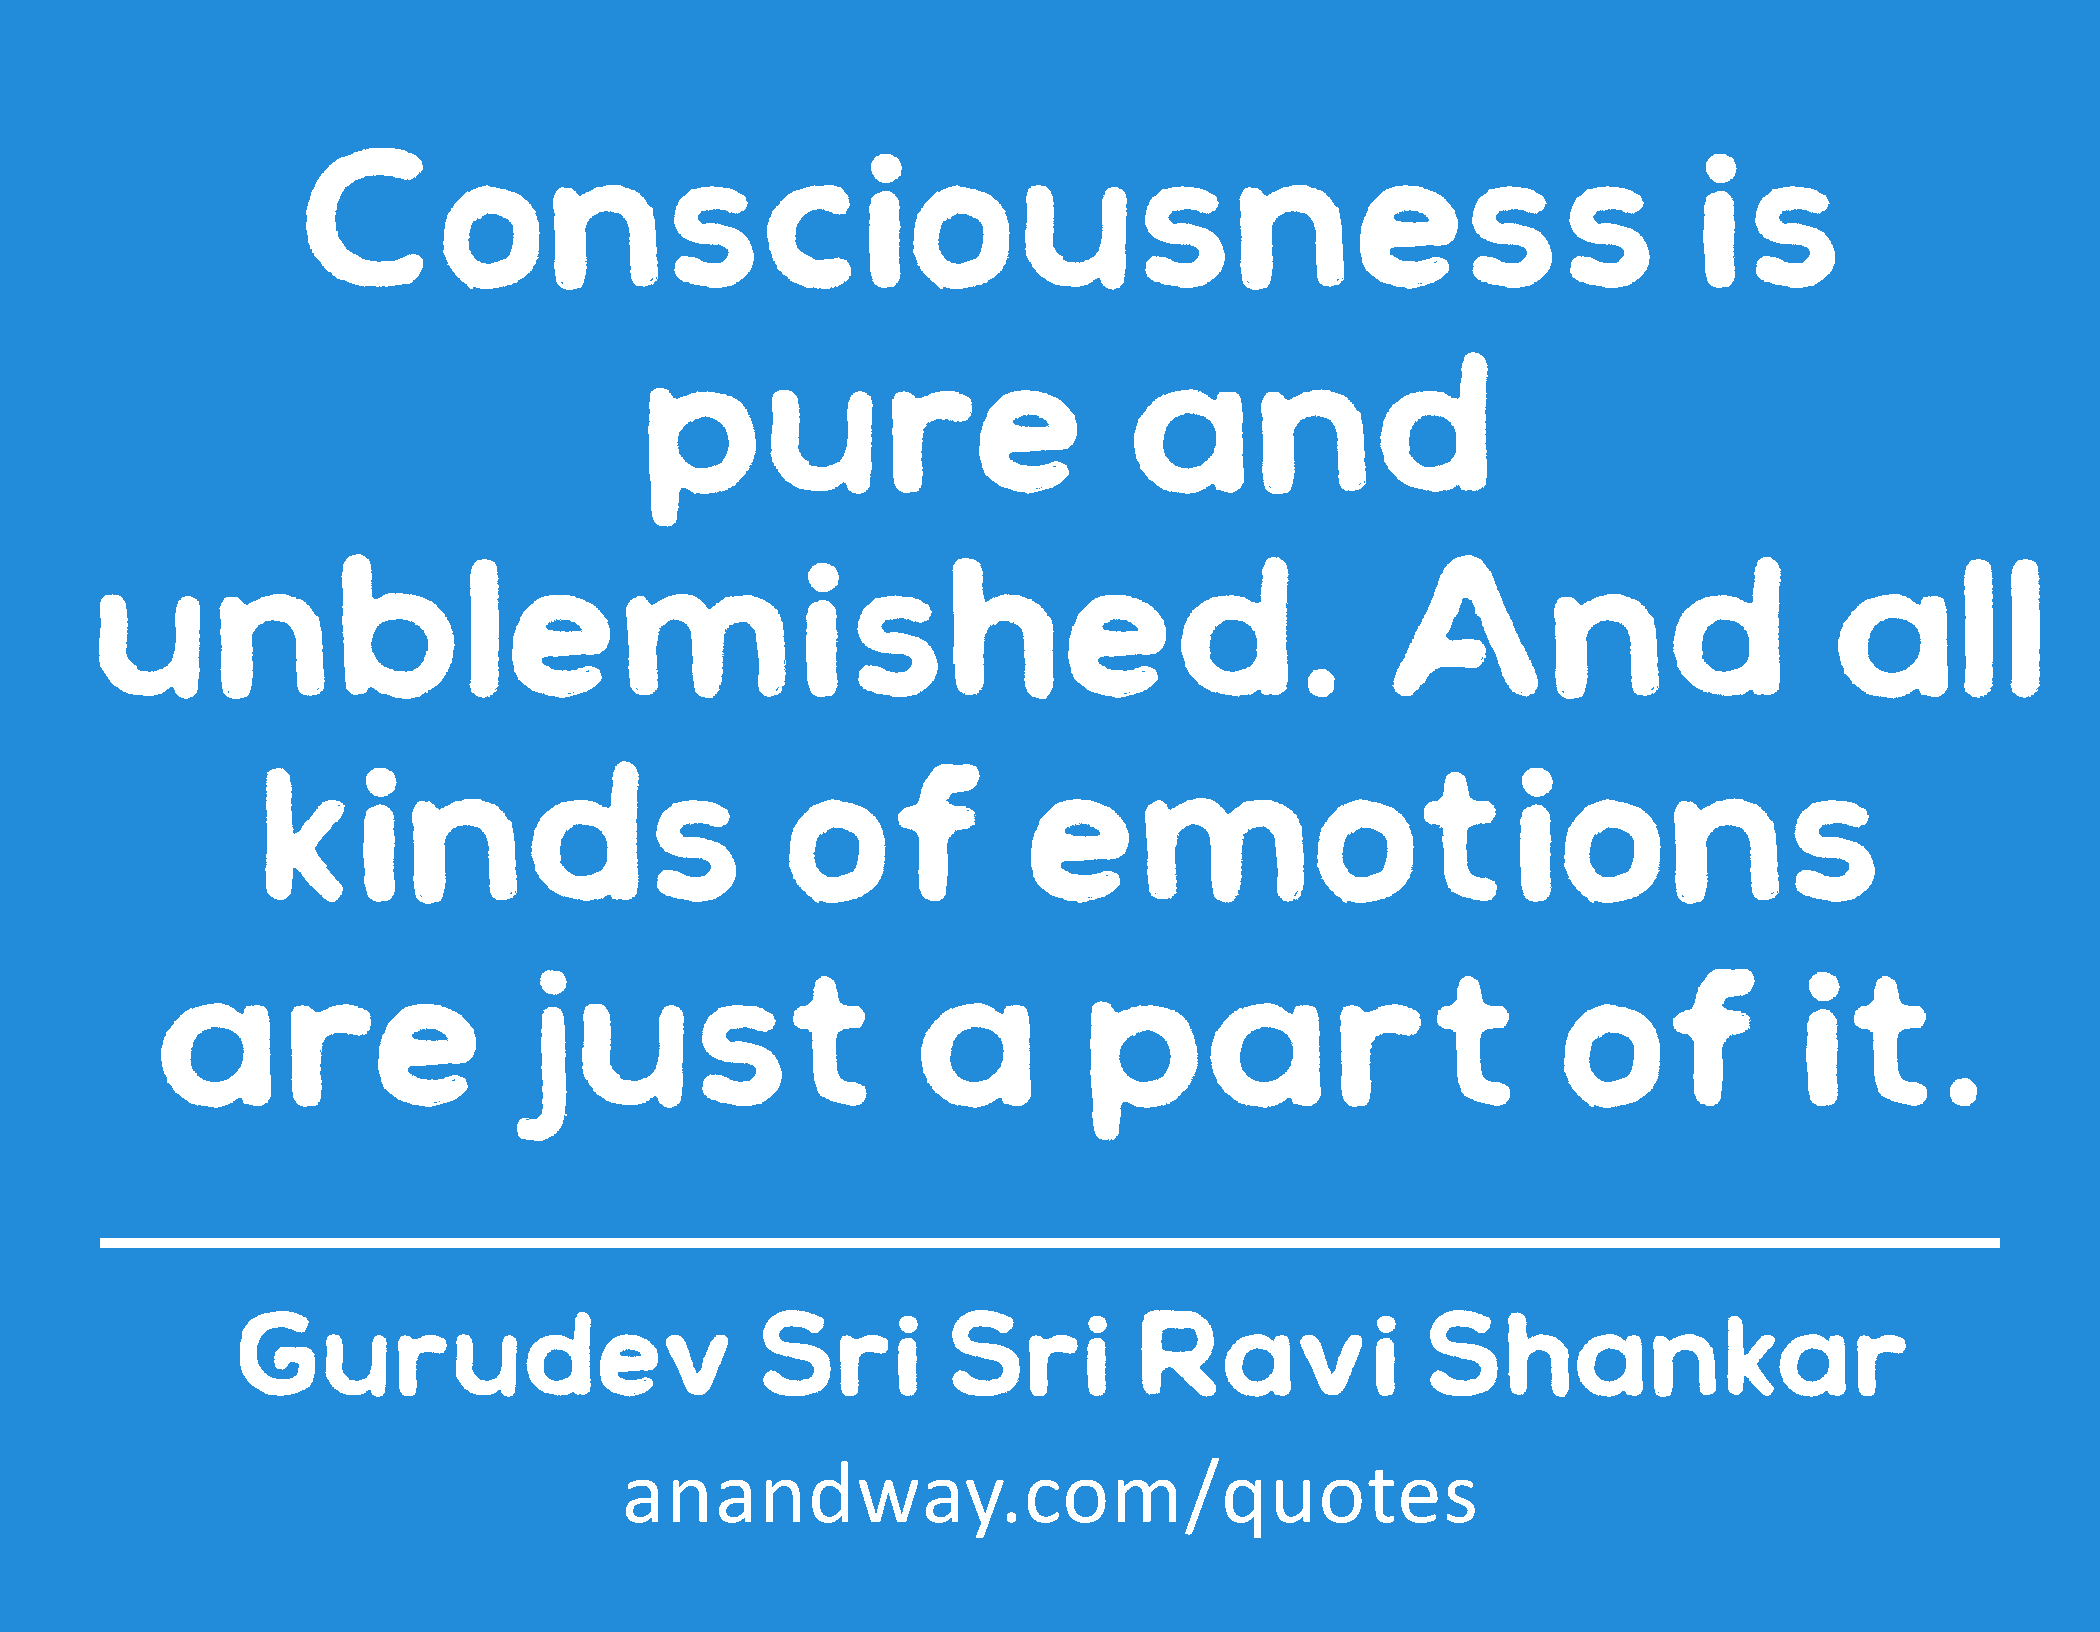 Consciousness is pure and unblemished. And all kinds of emotions are just a part of it. 
 -Gurudev Sri Sri Ravi Shankar